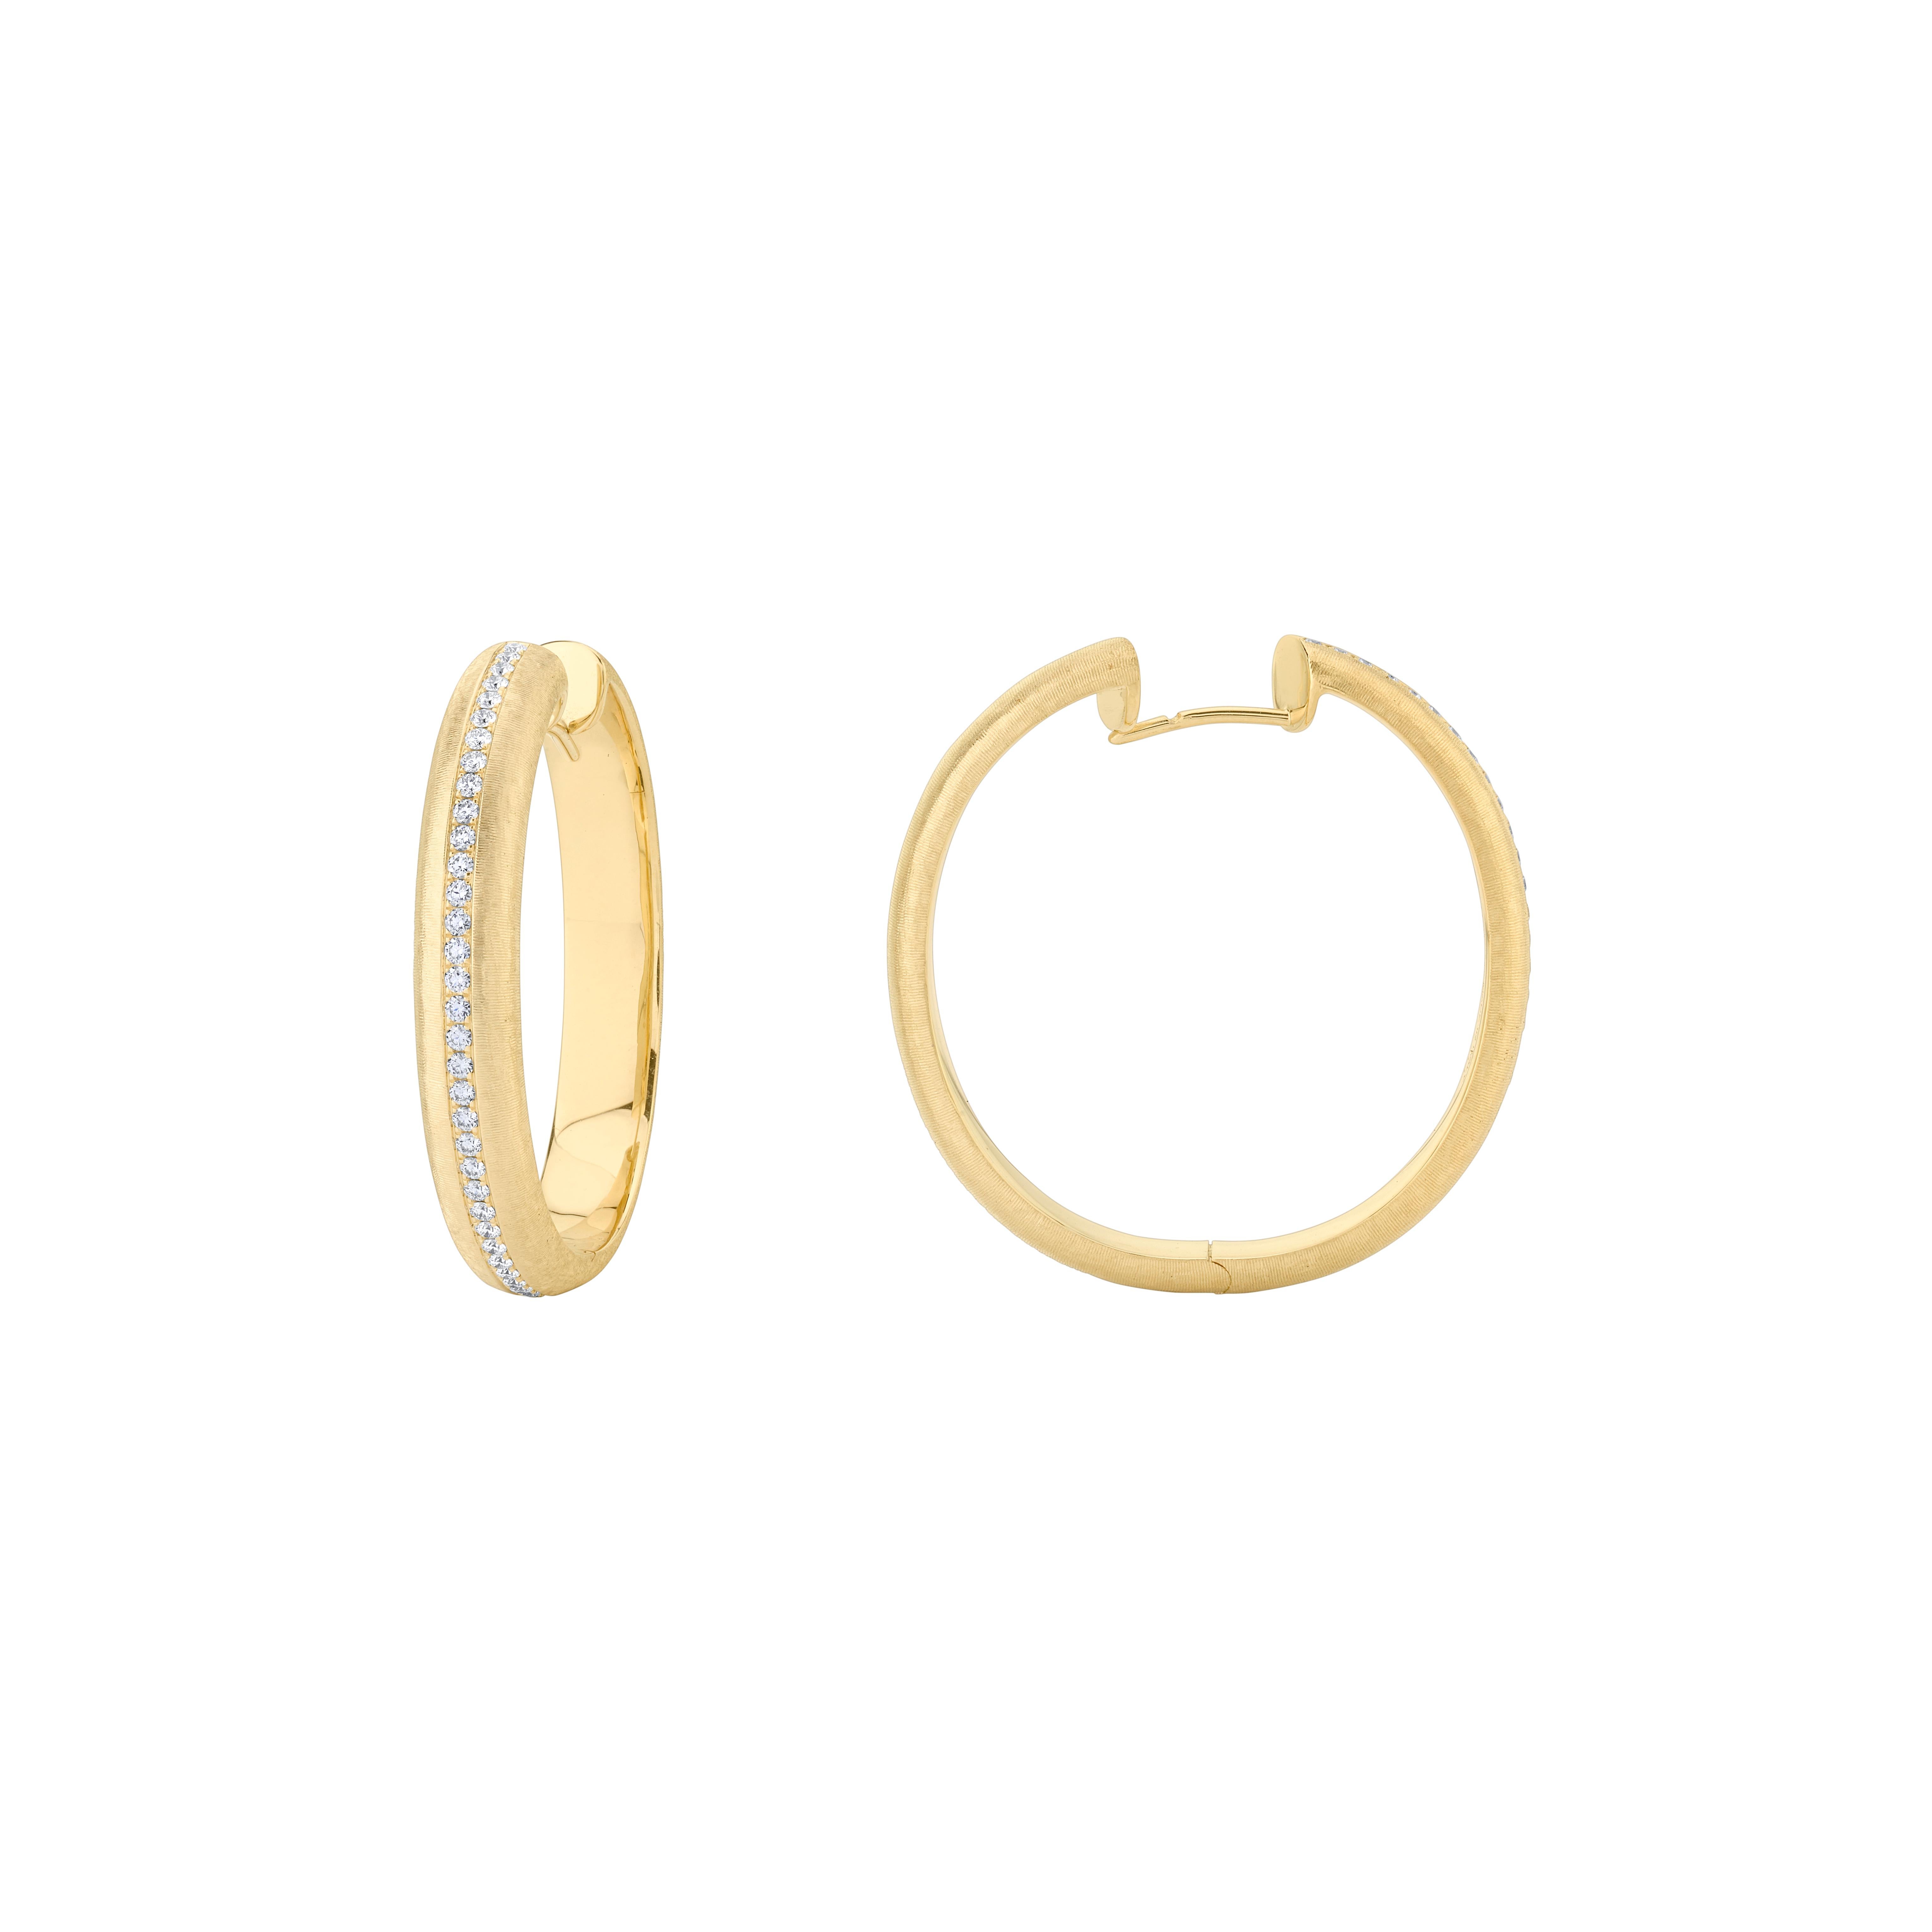 Style #: XH30E.
SYLVIA KONTENTE  18K Yellow gold diamond hoop earrings with hand-engraved finish.
Precision-cut, round brilliant diamonds.
Diamond total weight: 0.62ct tw.
Diamond color/clarity: DEF/VVS VS.
Hand-engraved finish - The ancient art of